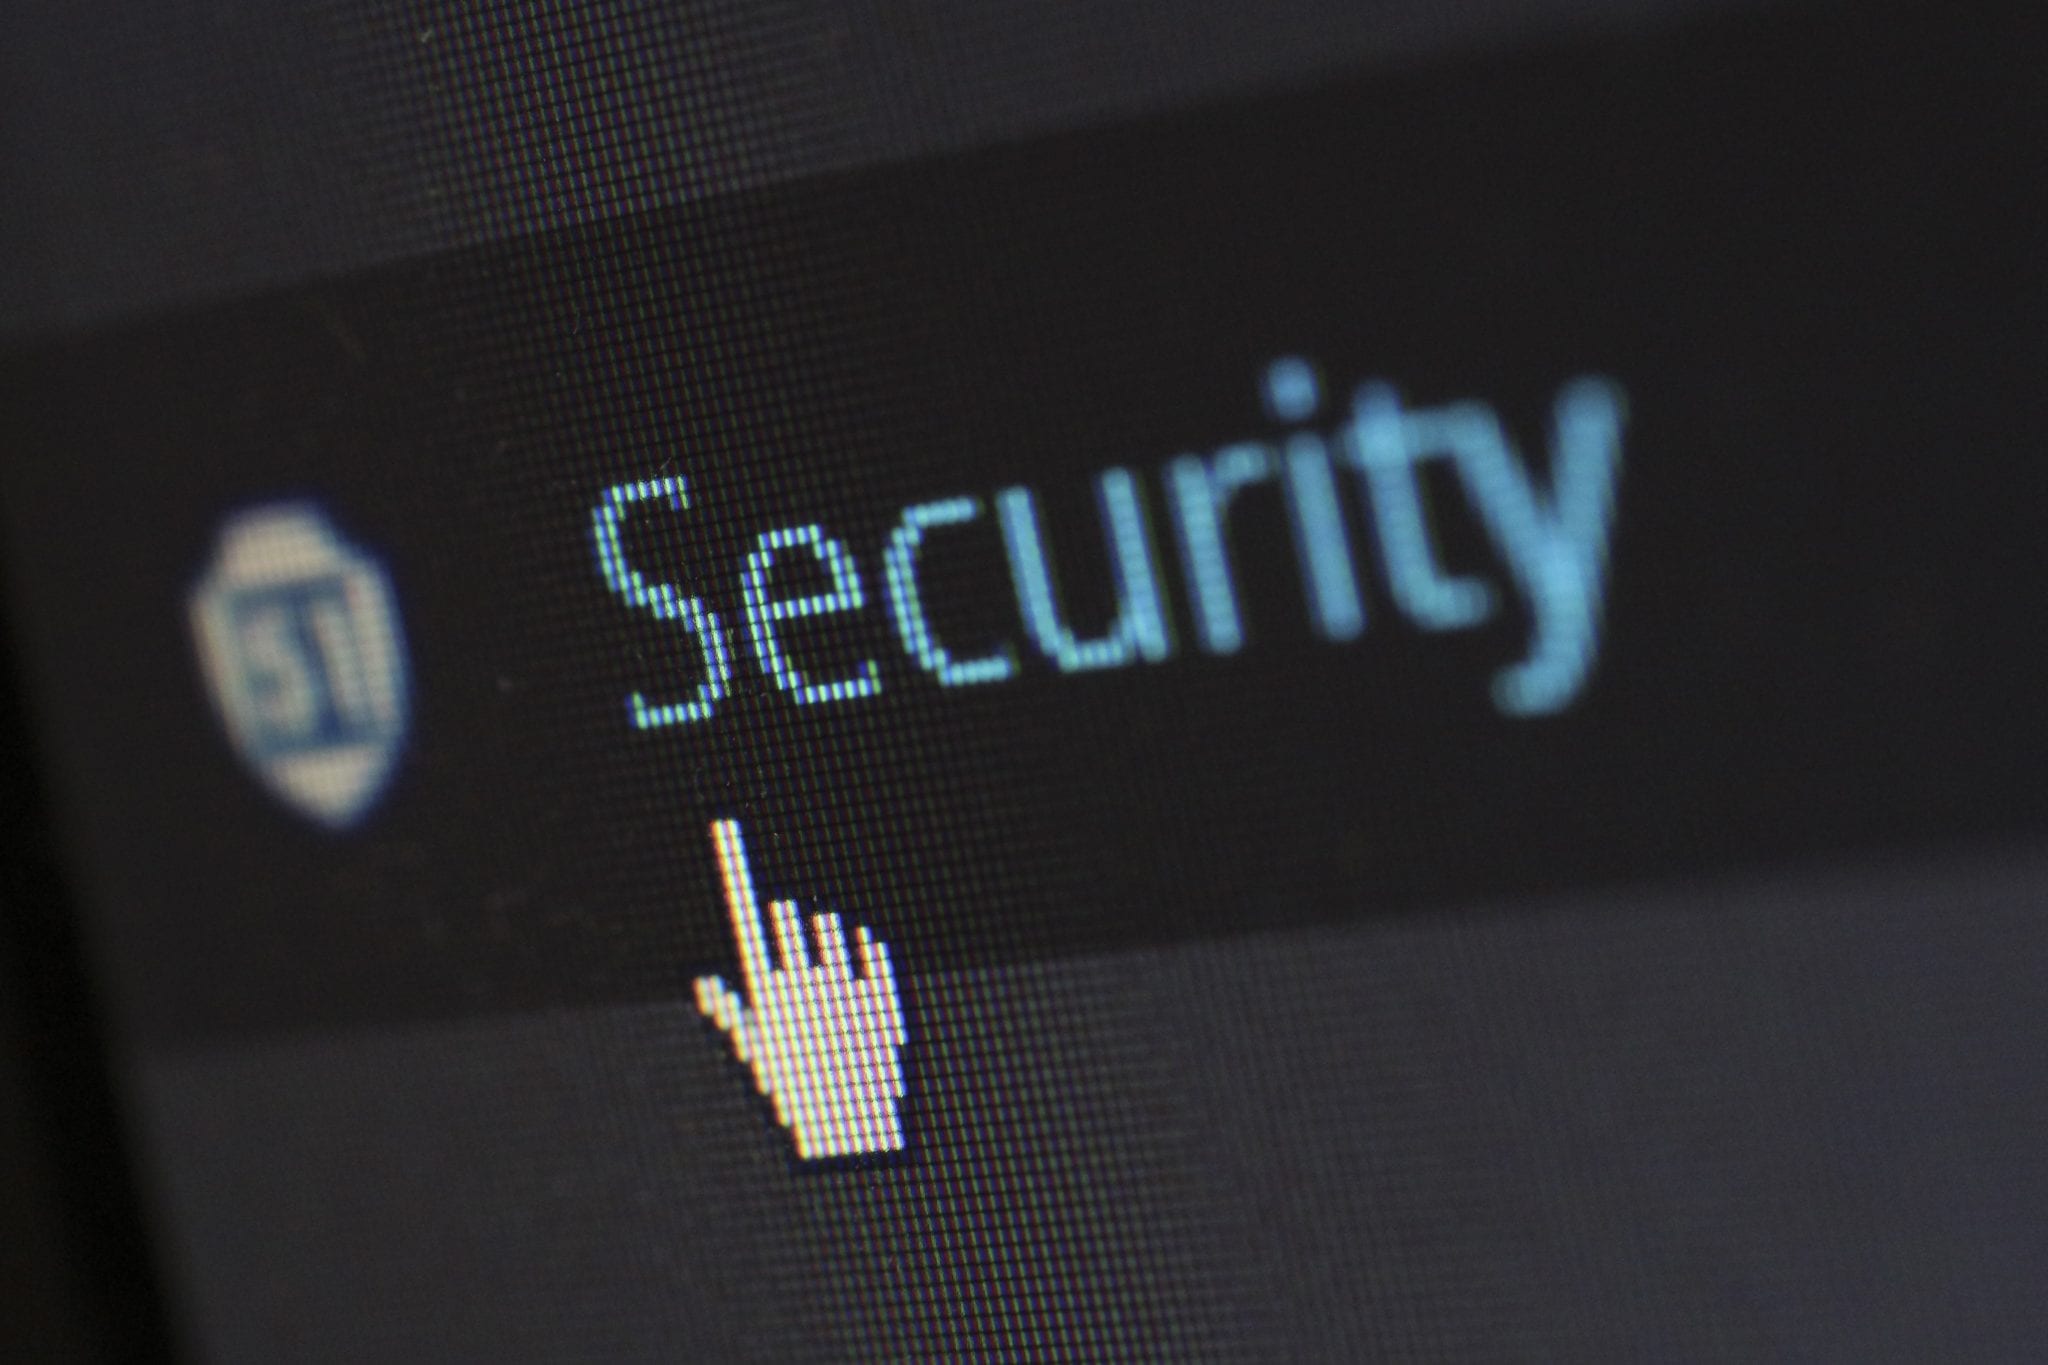 Top Tips to keep your Office Secure